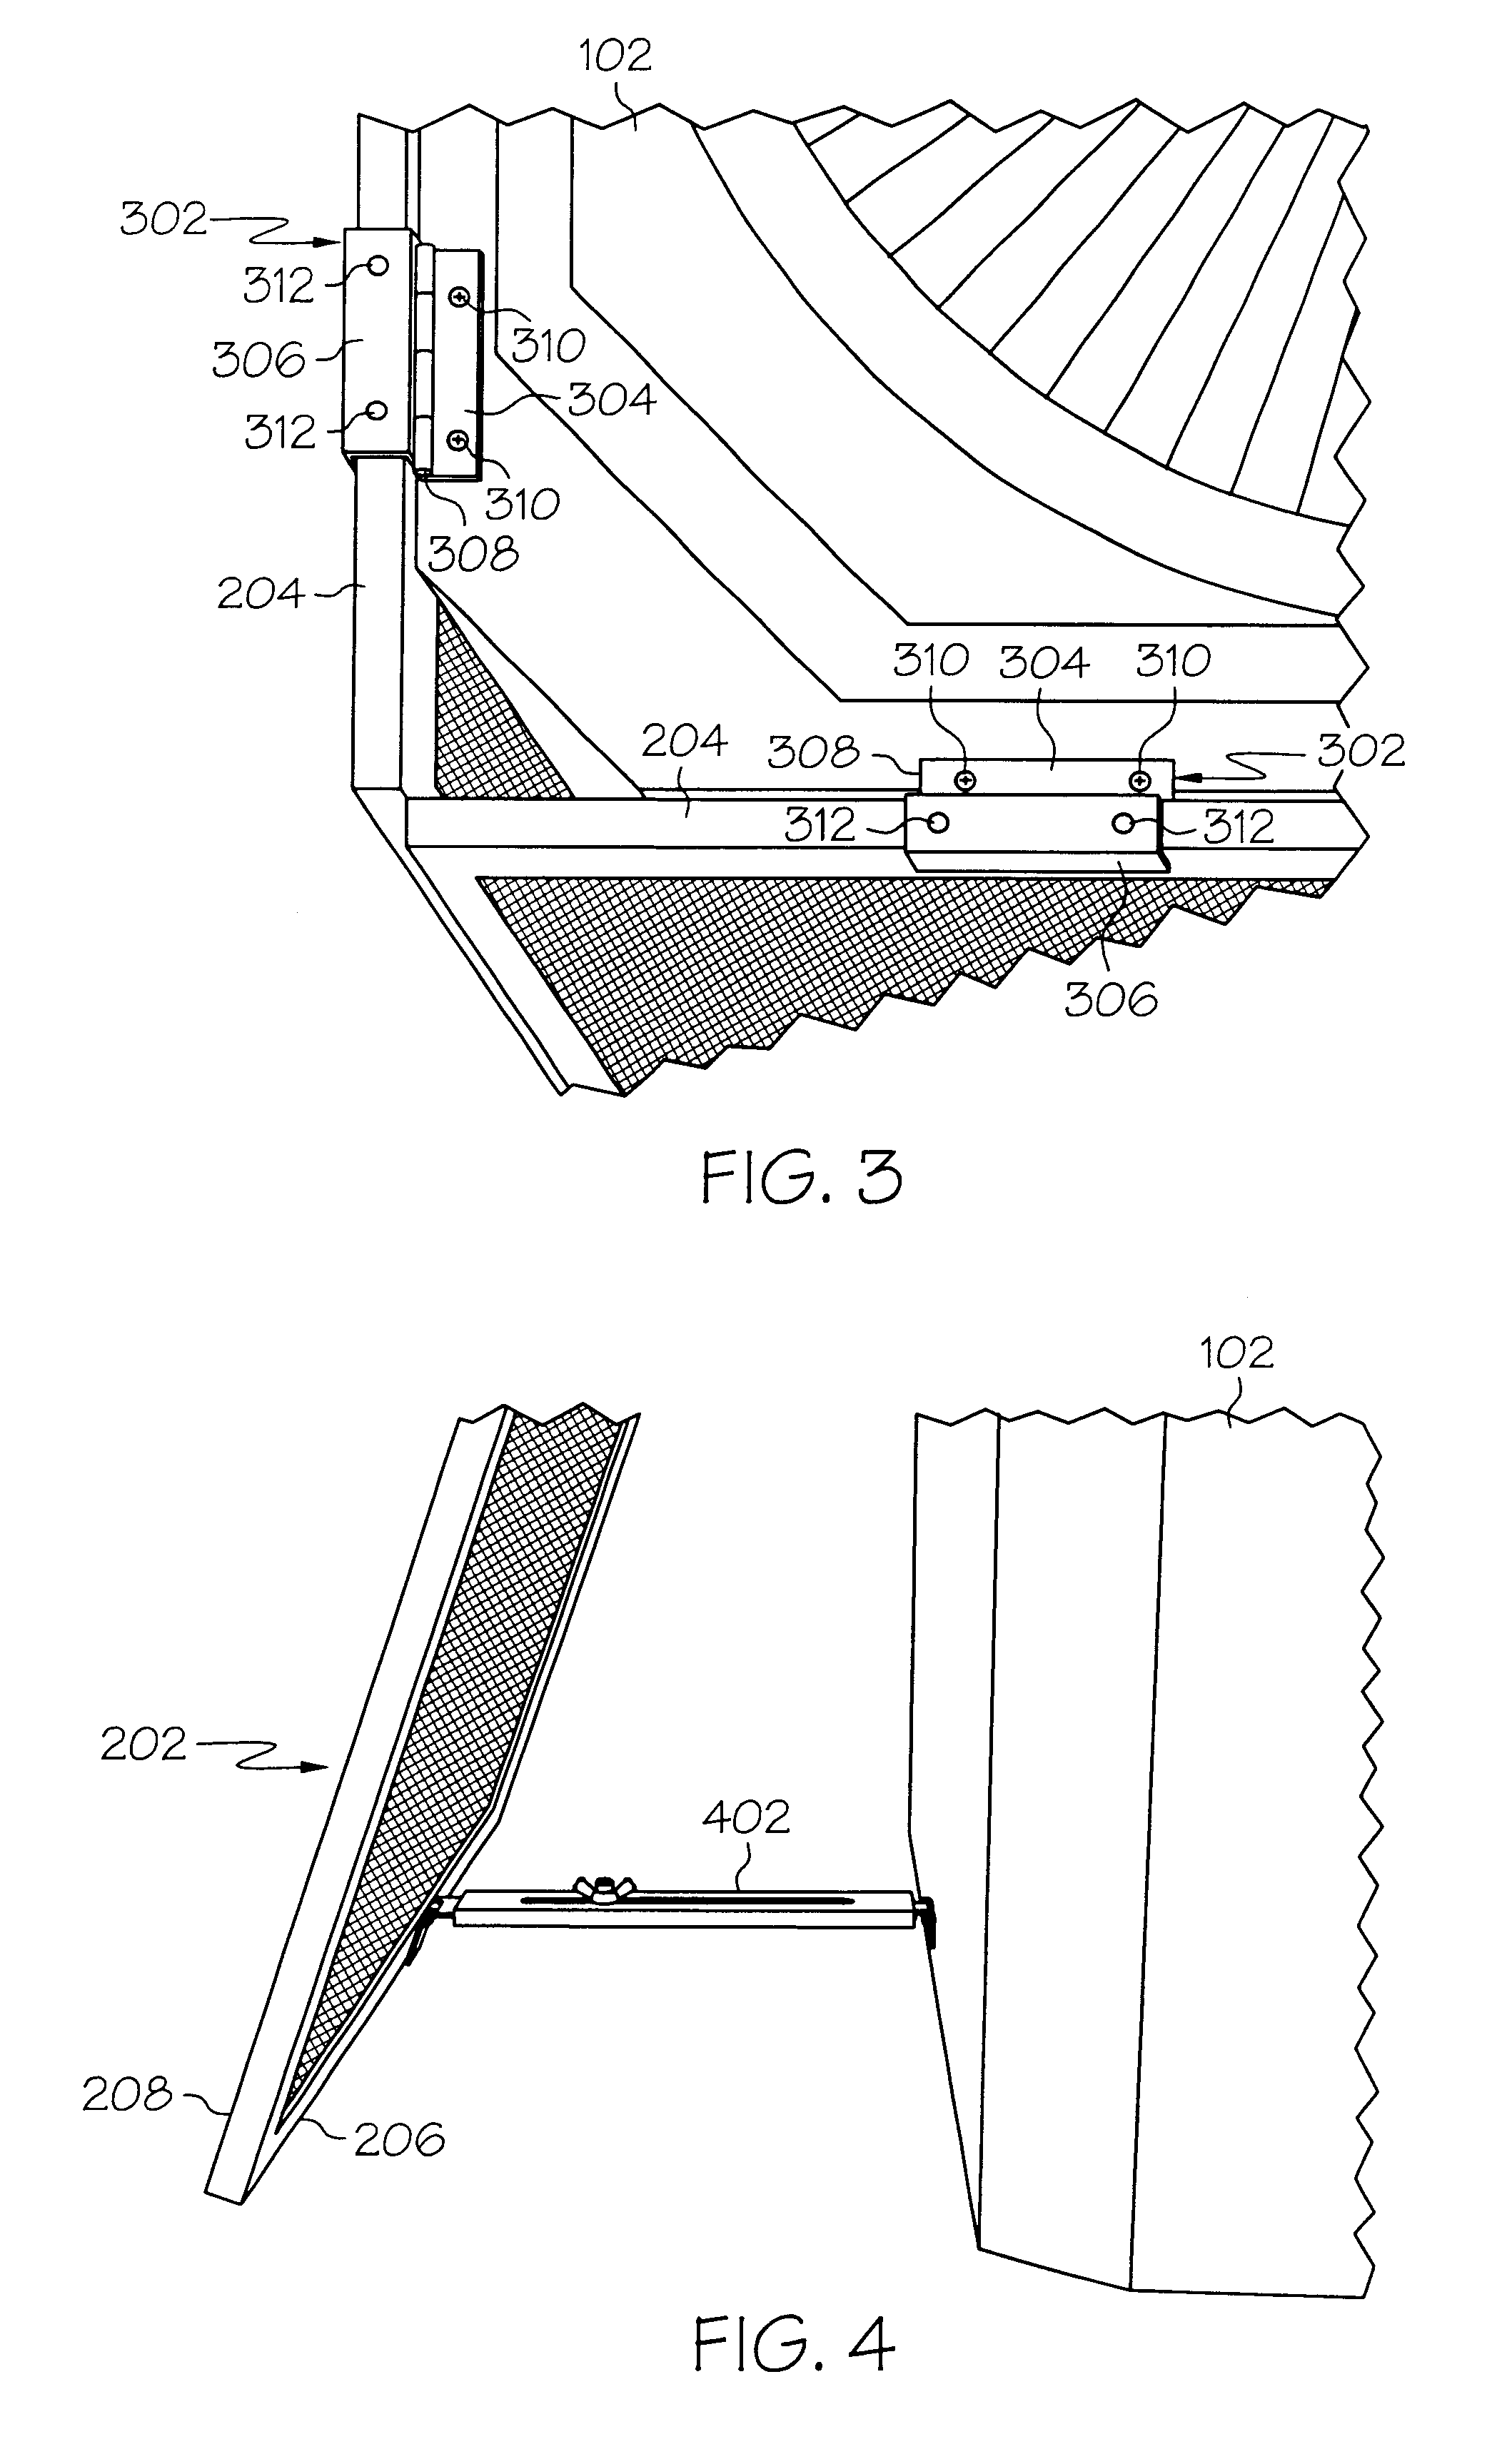 System for shading air conditioning units and method for installing the same